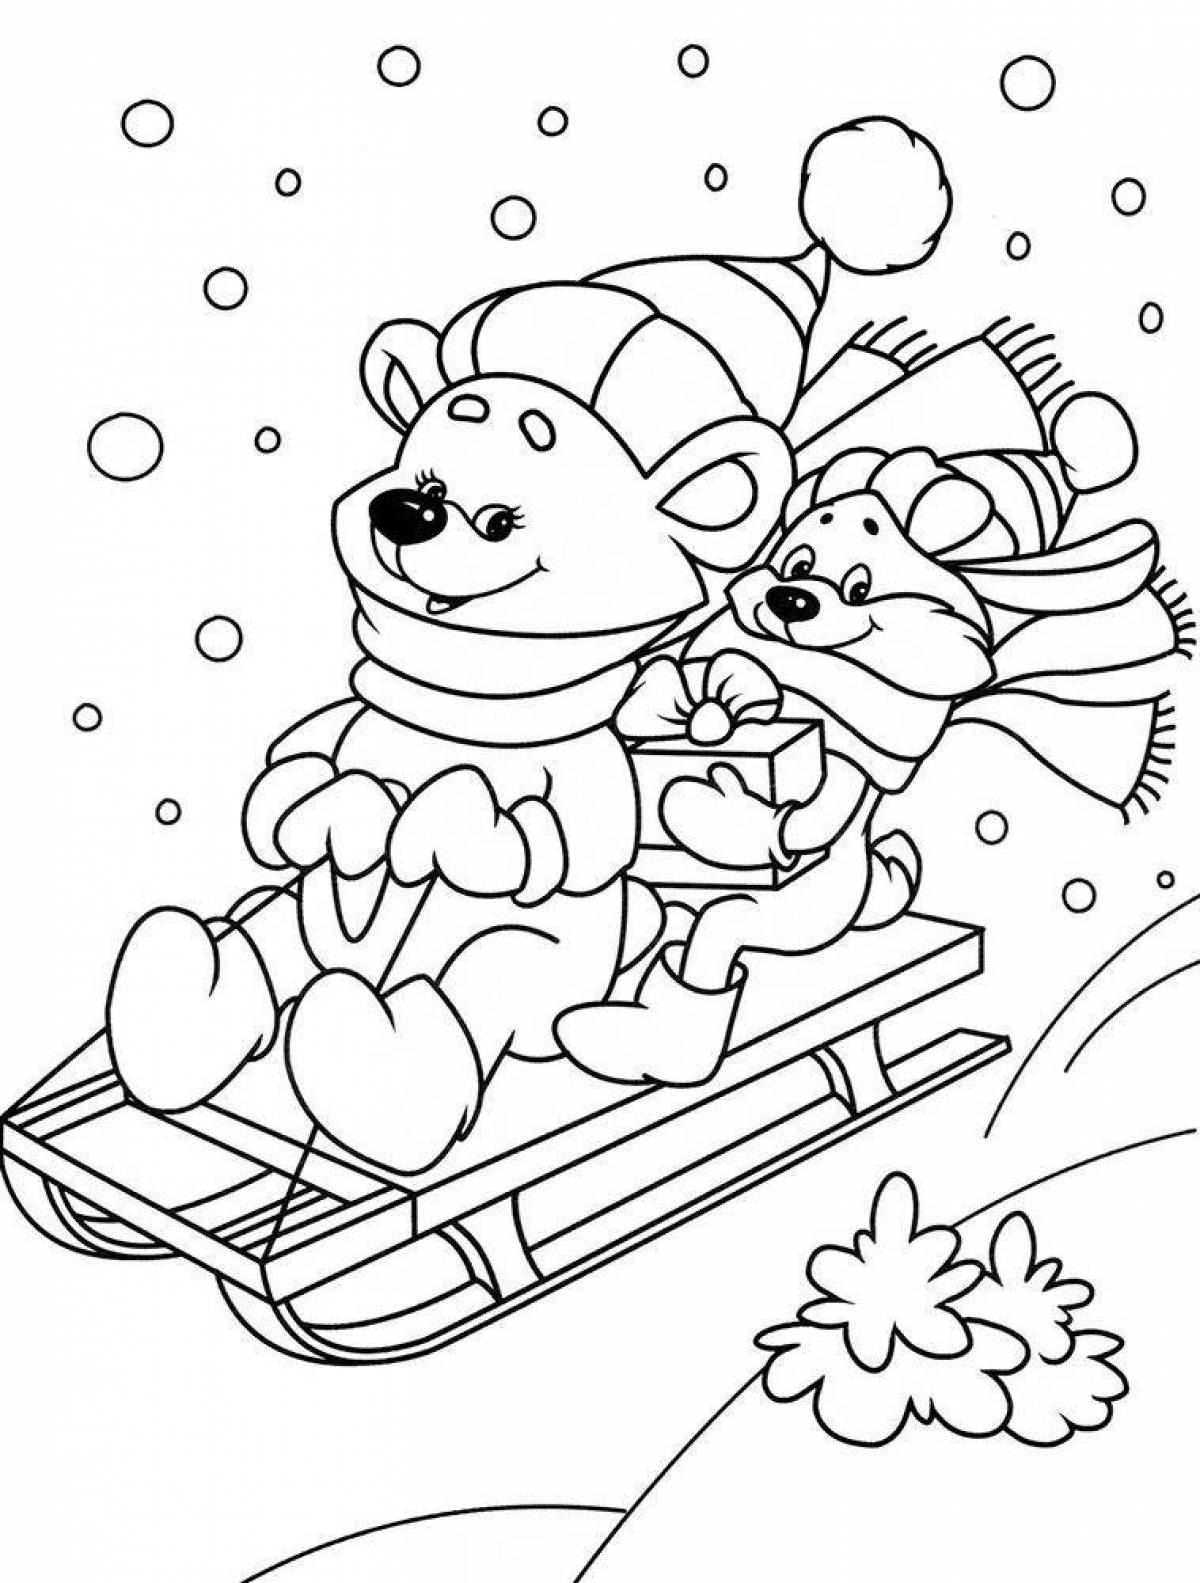 Fantastic winter coloring book for children 5 years old